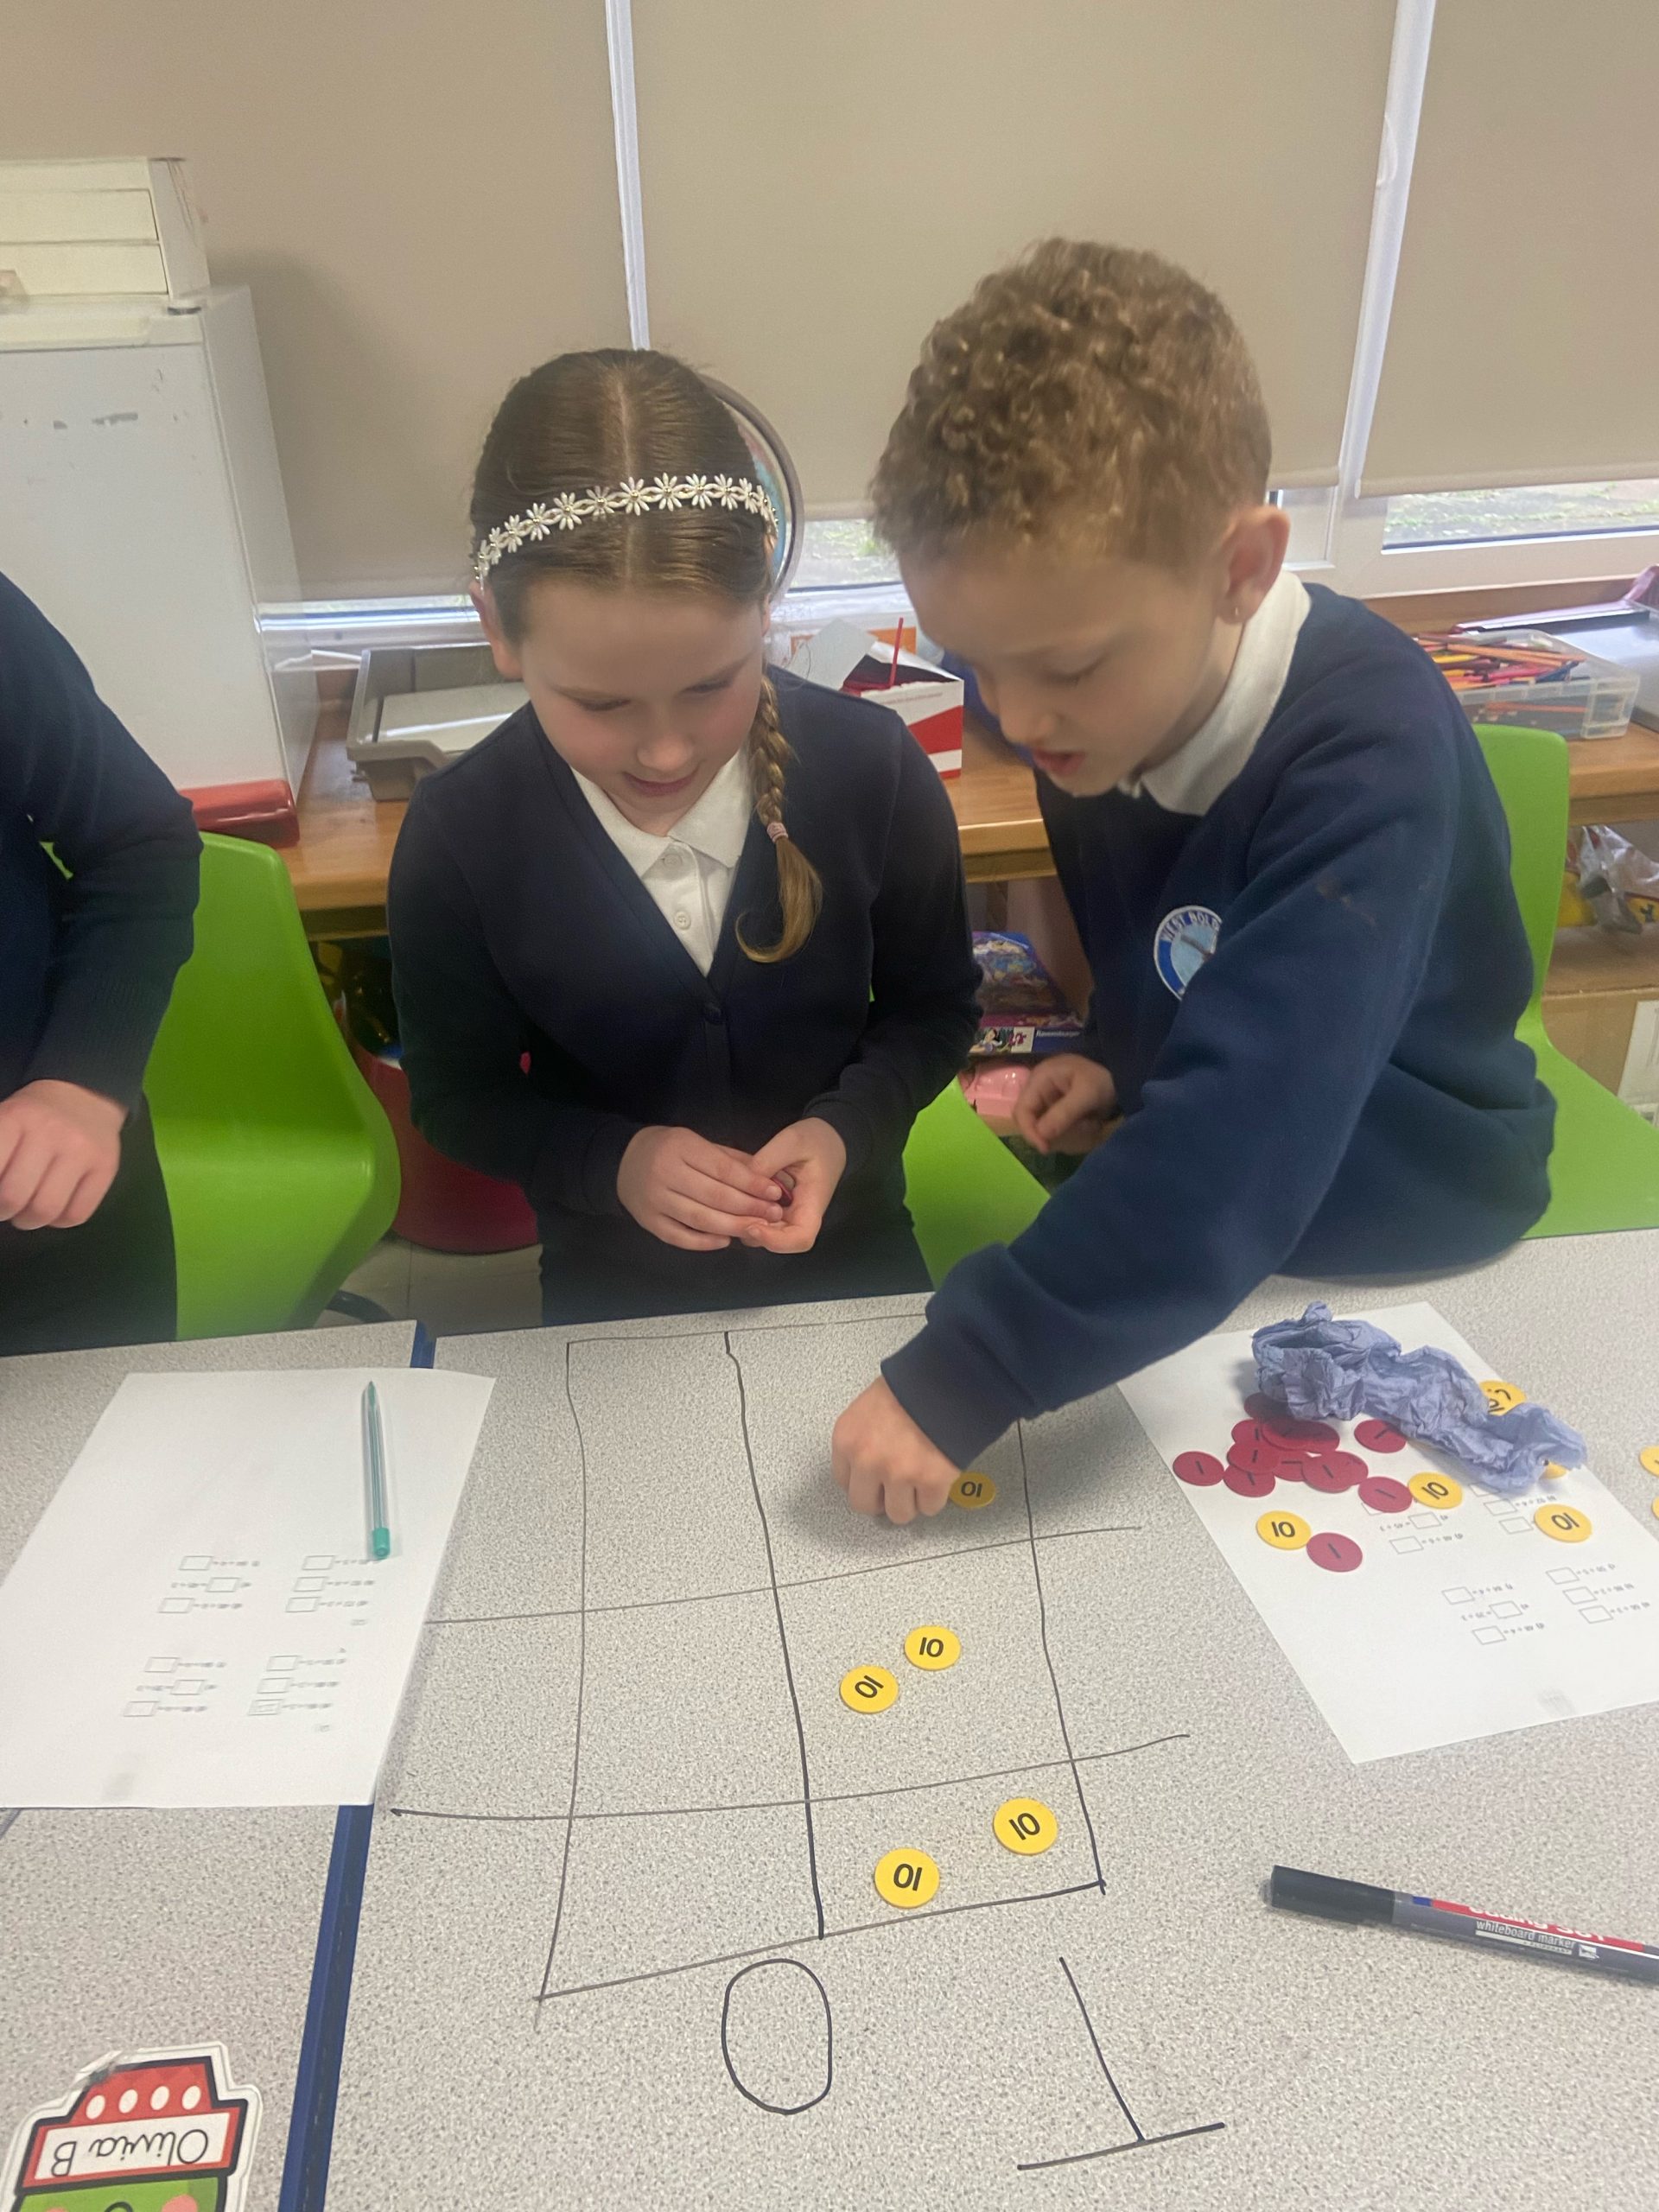 Year 4 children working on division using place value charts and counters